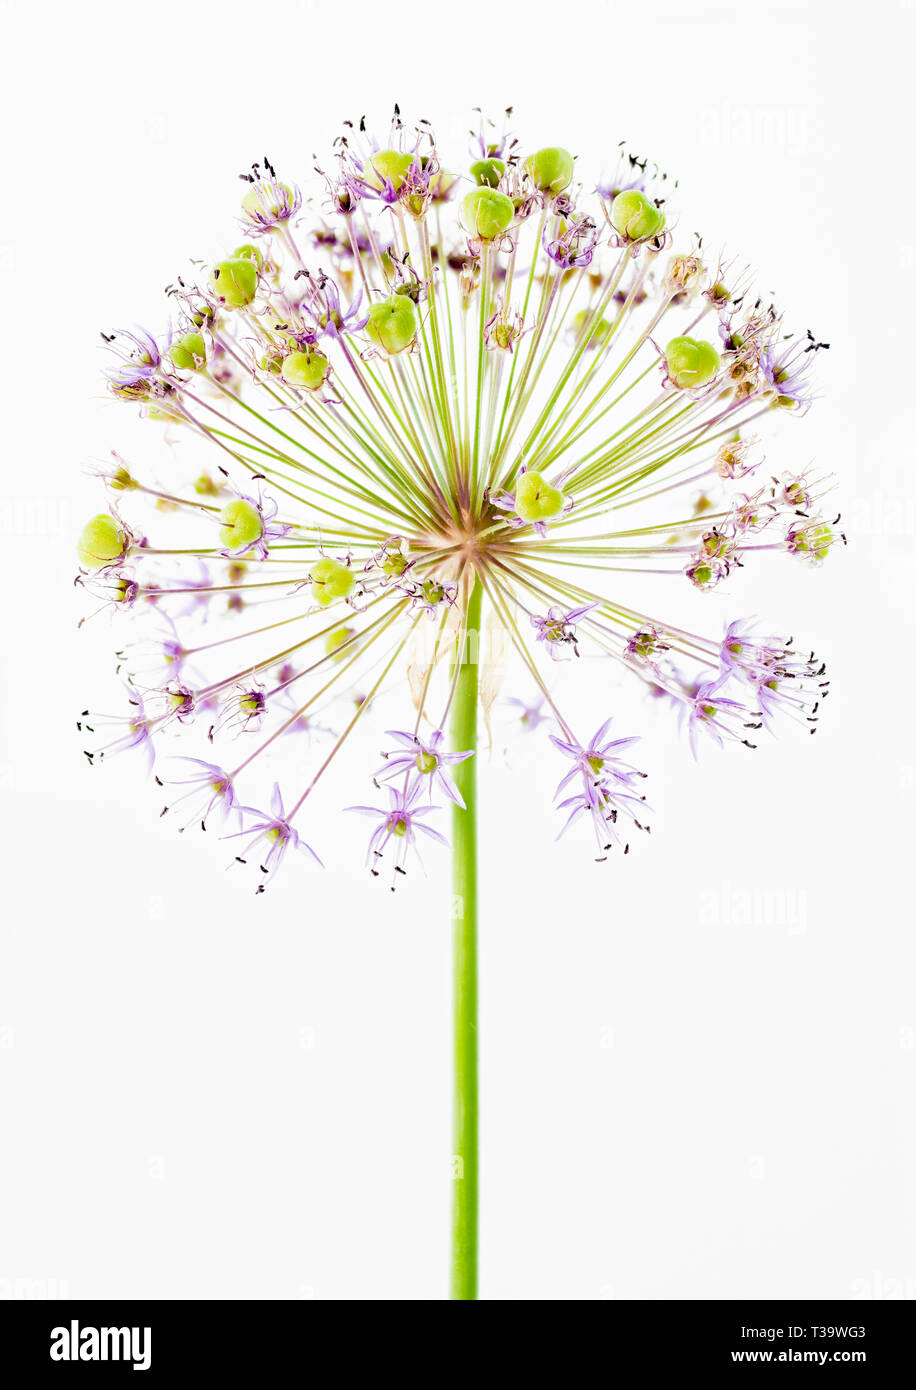 Allium flower head showing individual blossoms and seed cases starting to form. Stock Photo